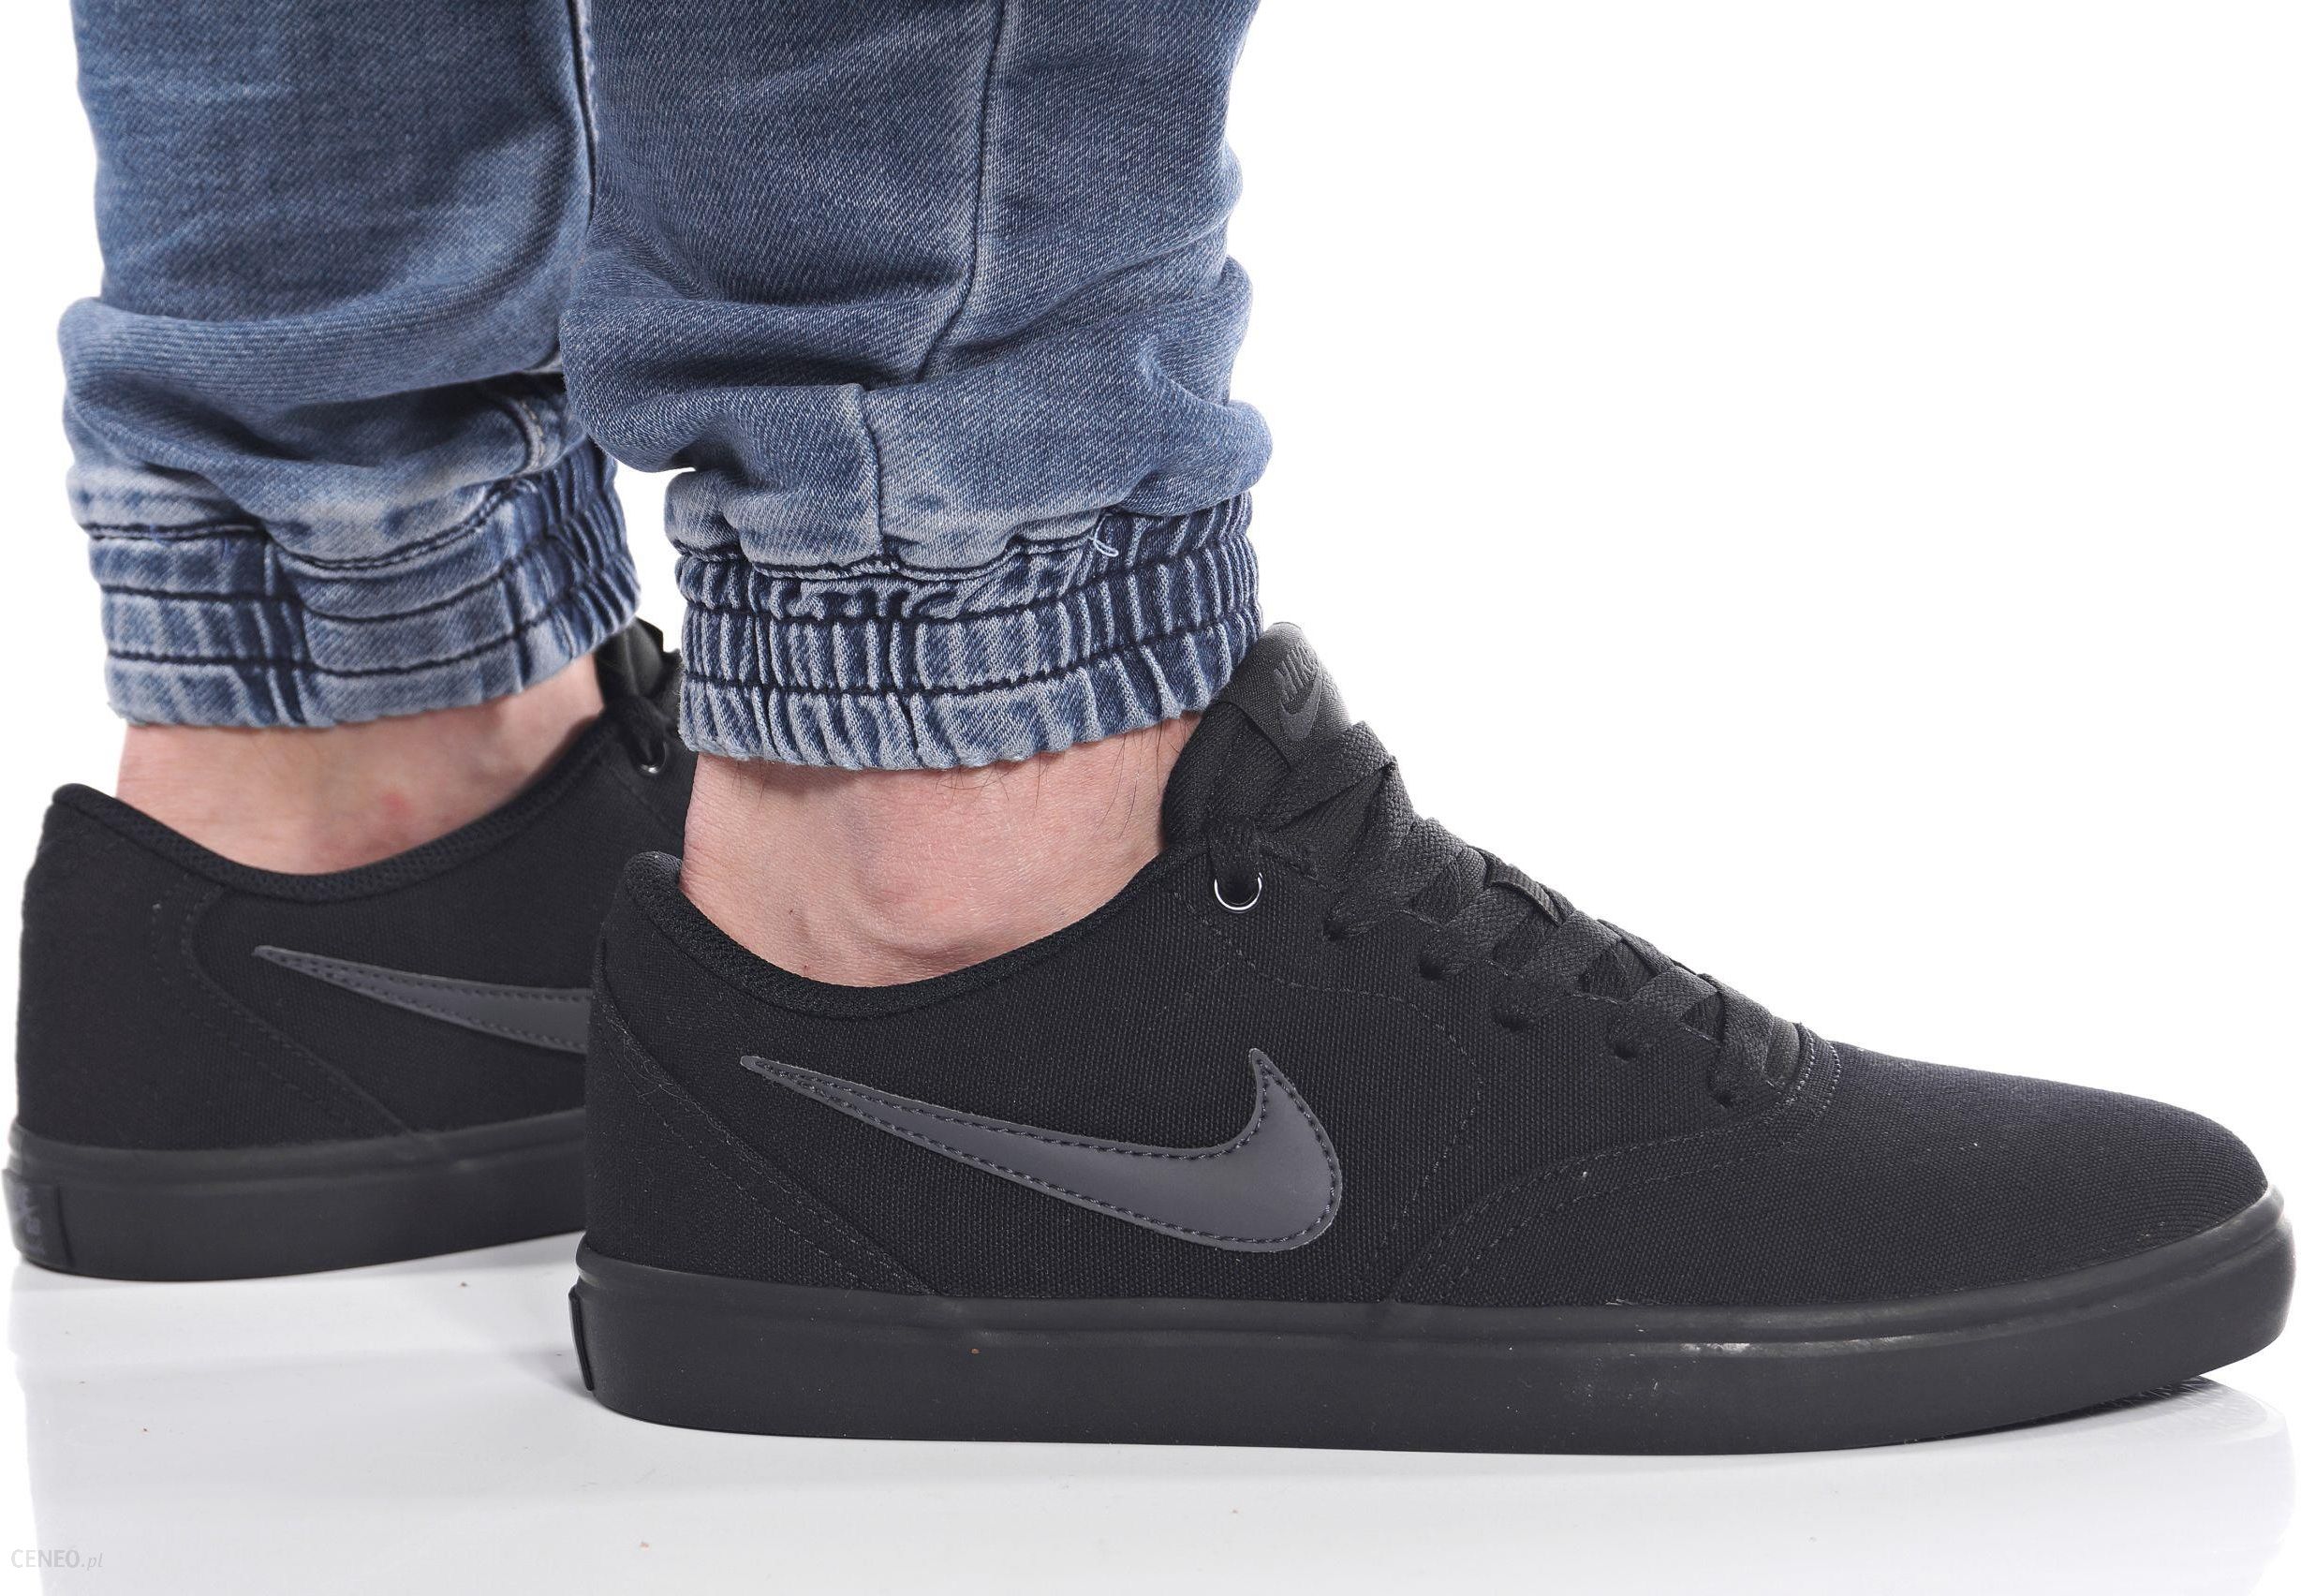 Koppeling trainer parlement BUTY NIKE SB CHECK SOLAR CNVS 843896-002 - Ceny i opinie - Ceneo.pl